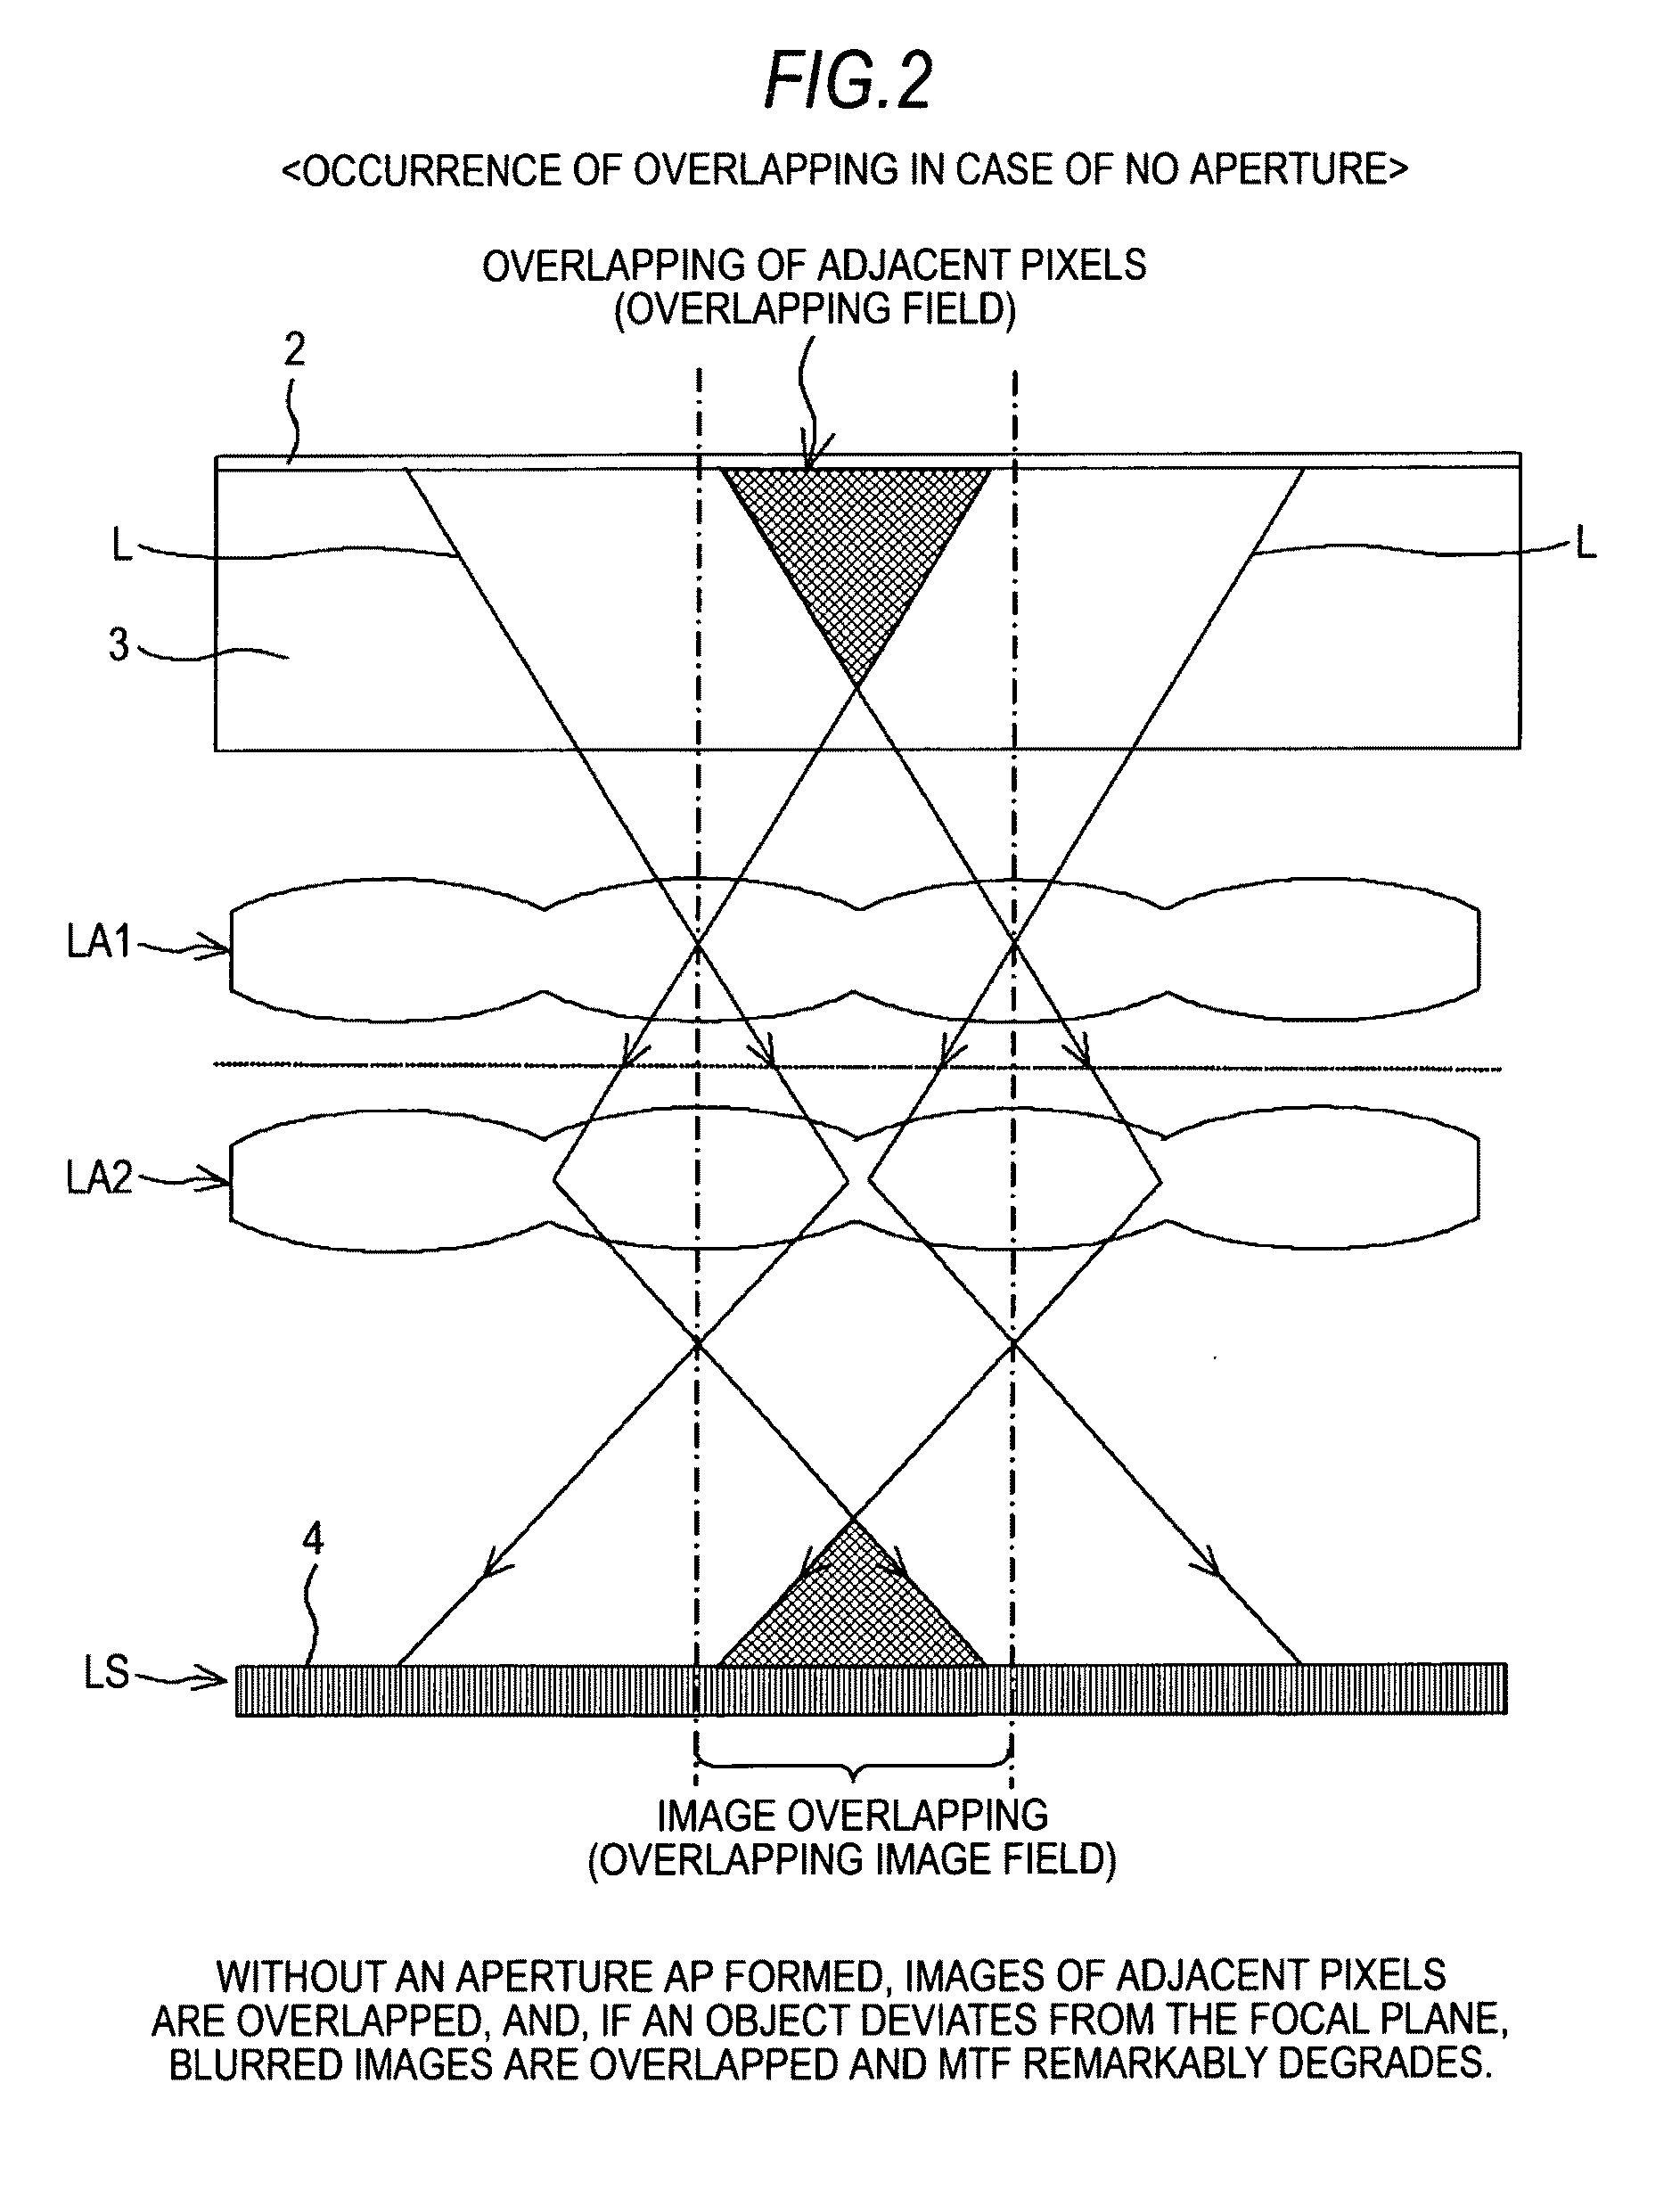 Image reading apparatus and optical module using the same